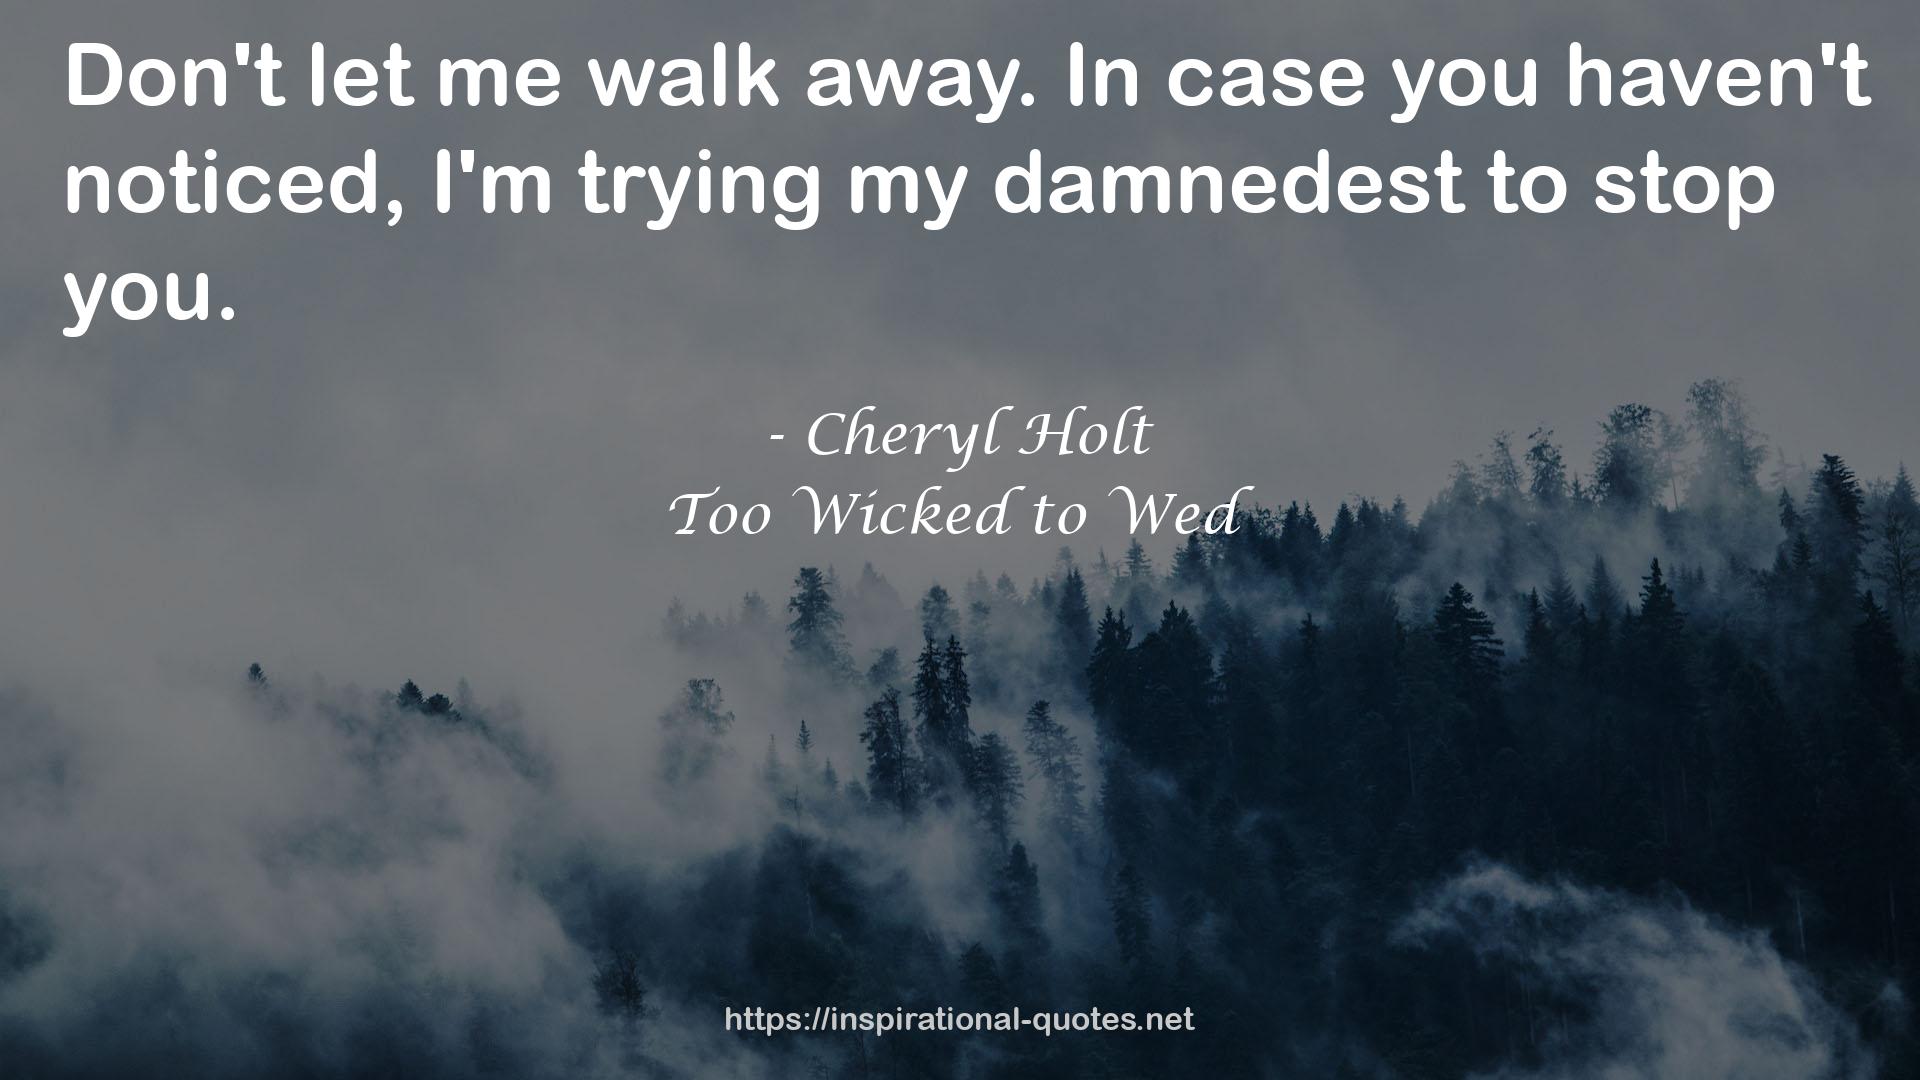 Too Wicked to Wed QUOTES